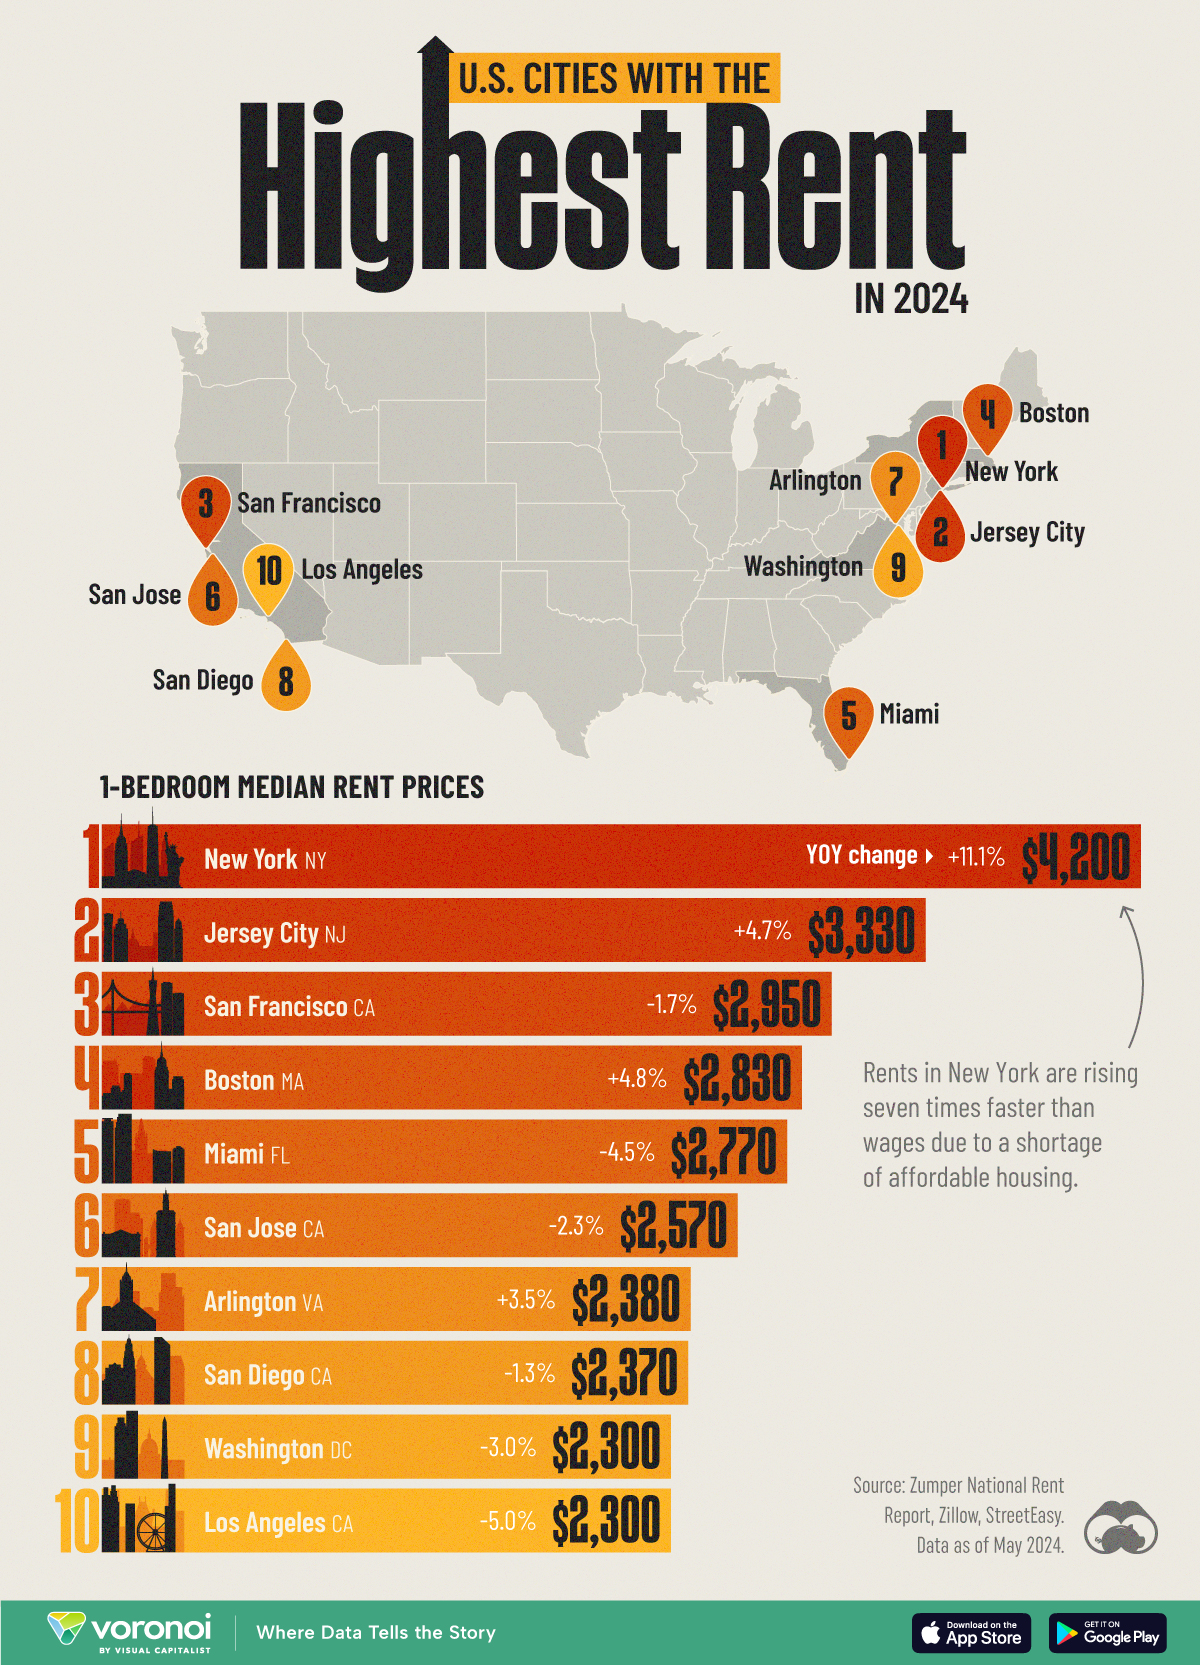 Bar chart showing the U.S. cities with the highest rent in 2024.